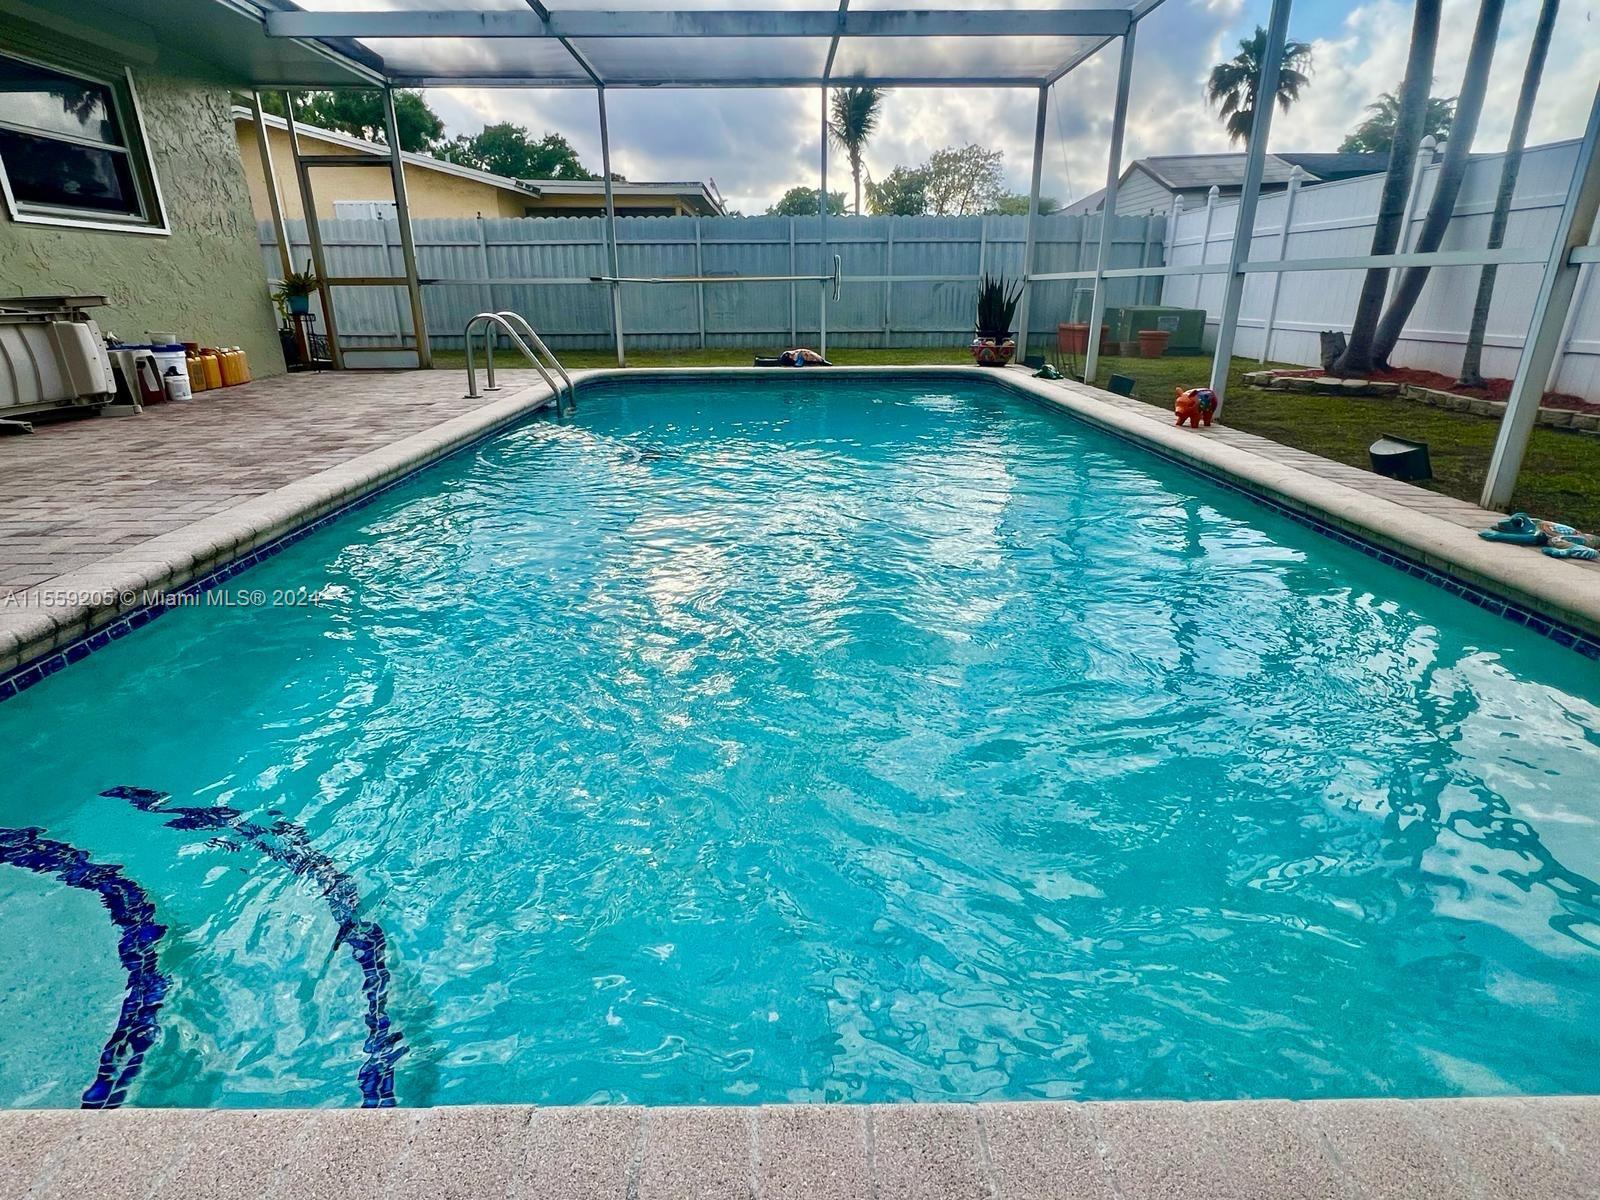 Photo of 8701 NW 7th Ct in Pembroke Pines, FL